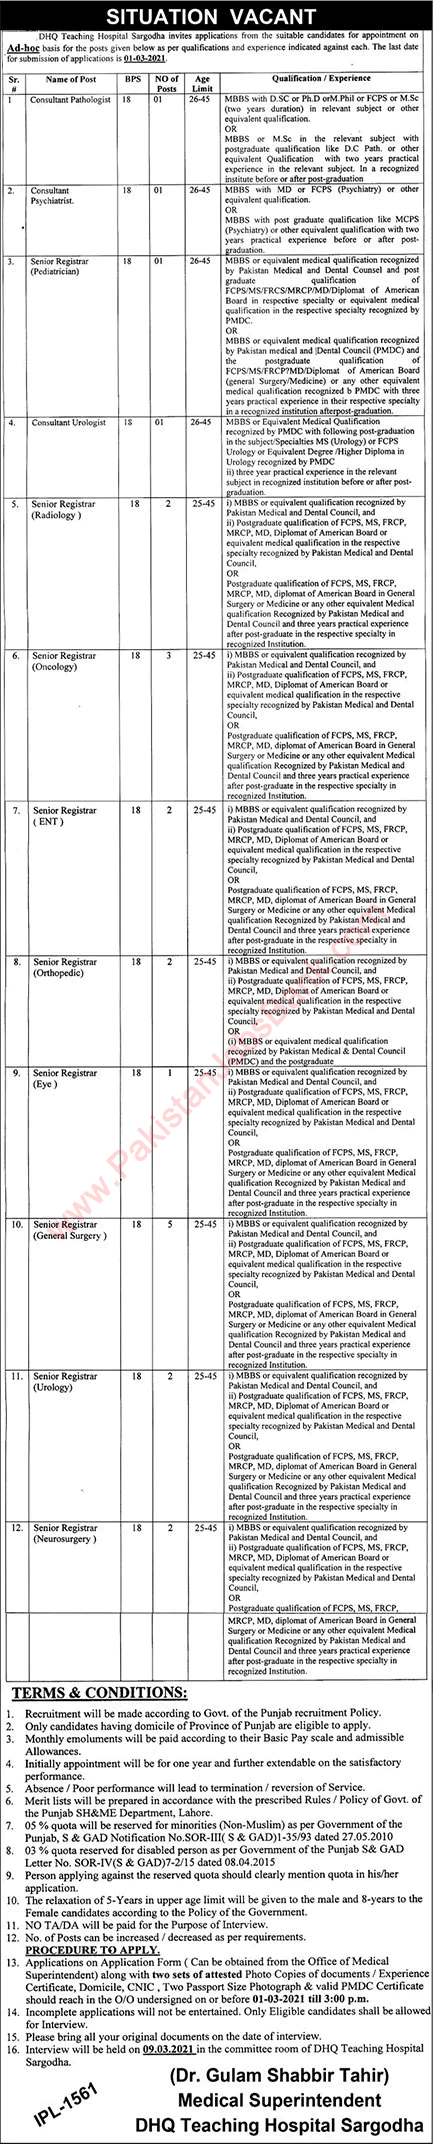 DHQ Teaching Hospital Sargodha Jobs 2021 February Specialist Doctors & Consultants Latest